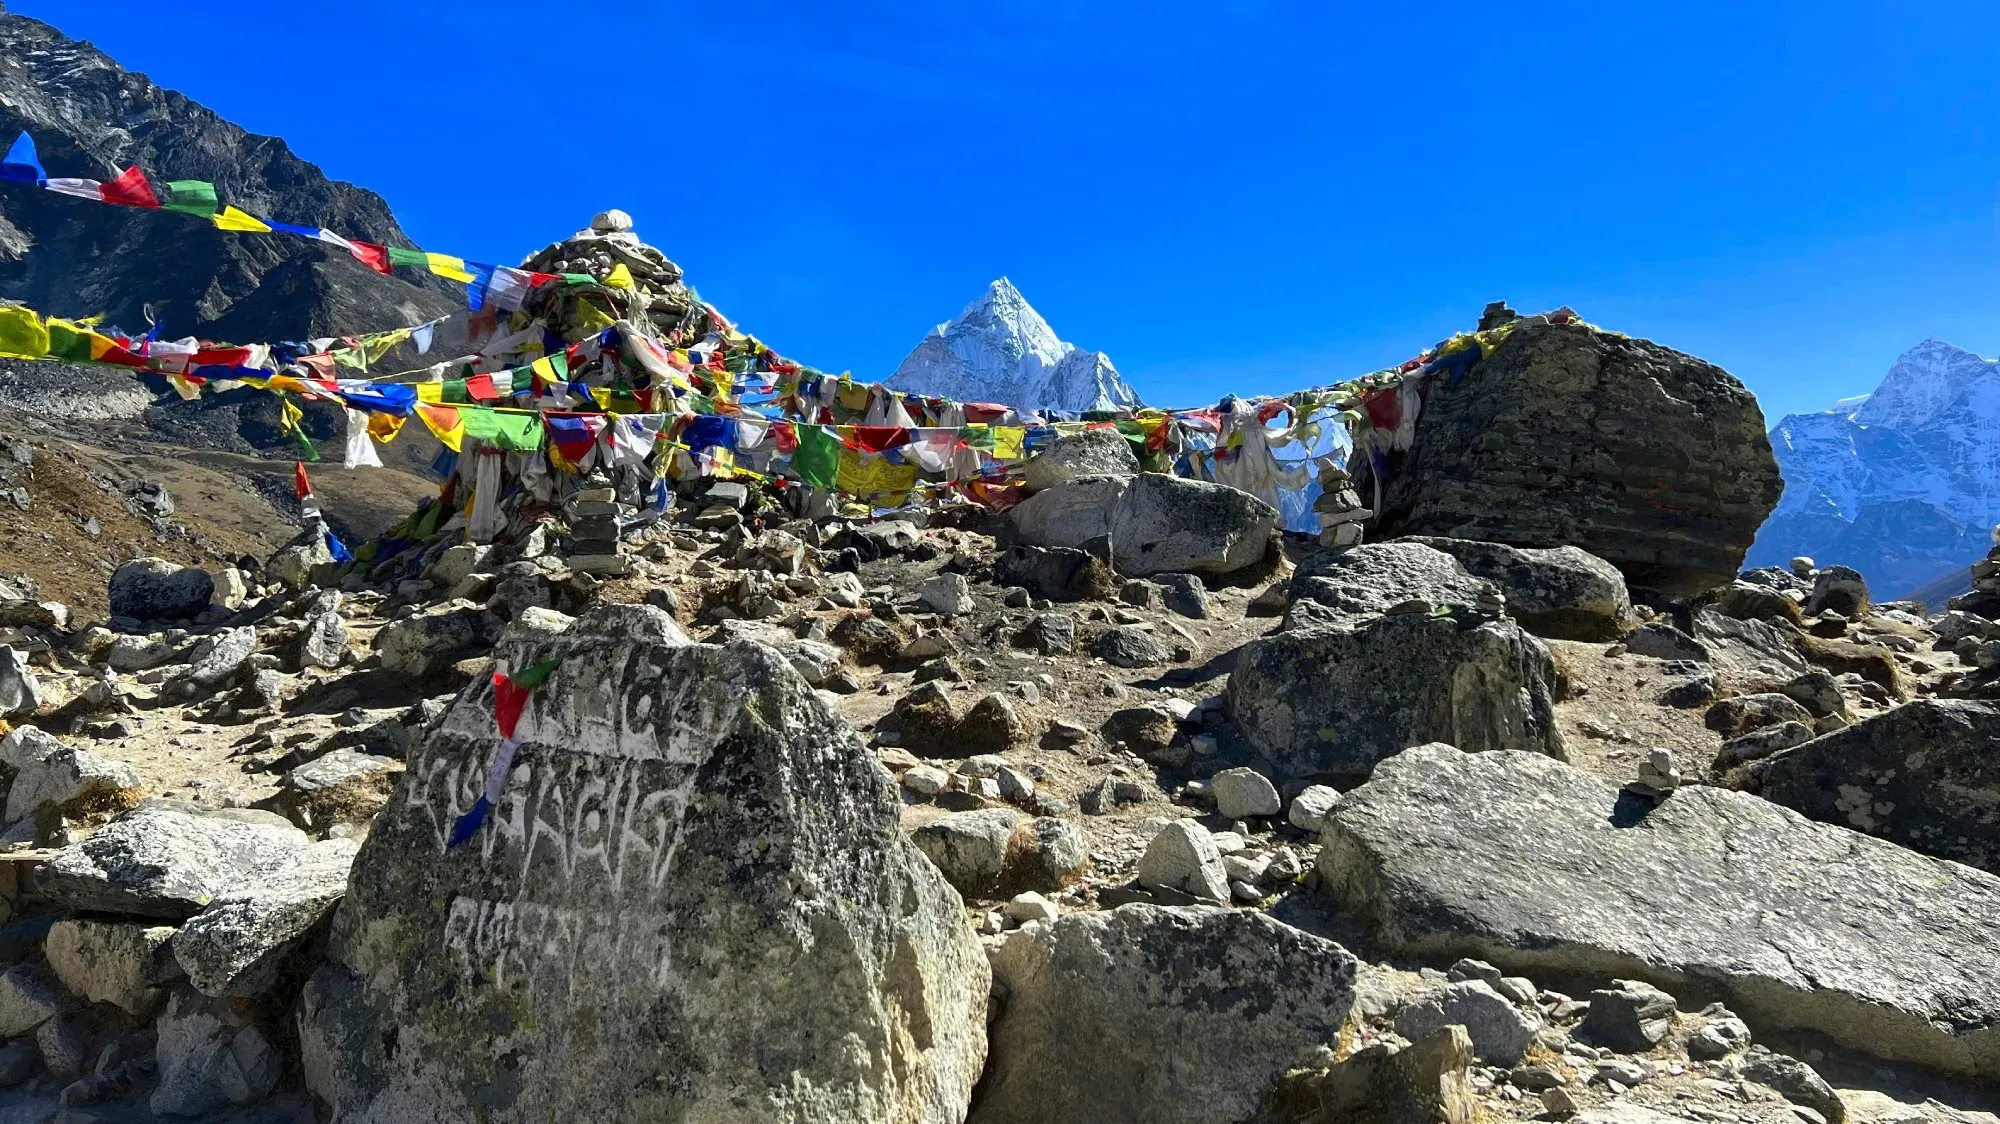 Carved rocks with prayer flags strung between them